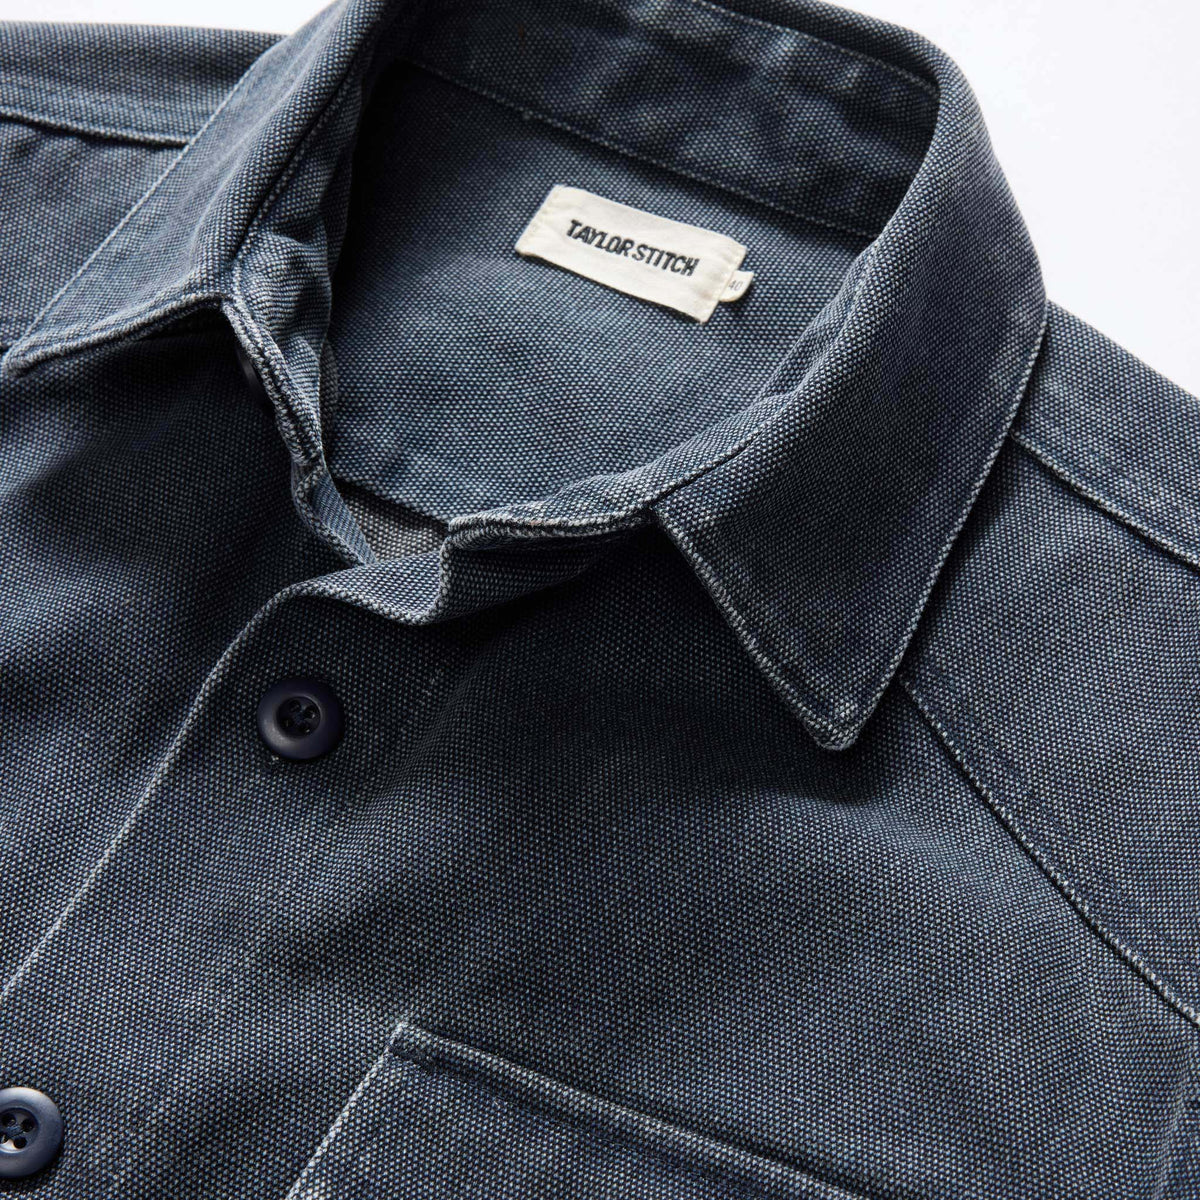 The Shop Shirt in Navy Chipped Canvas